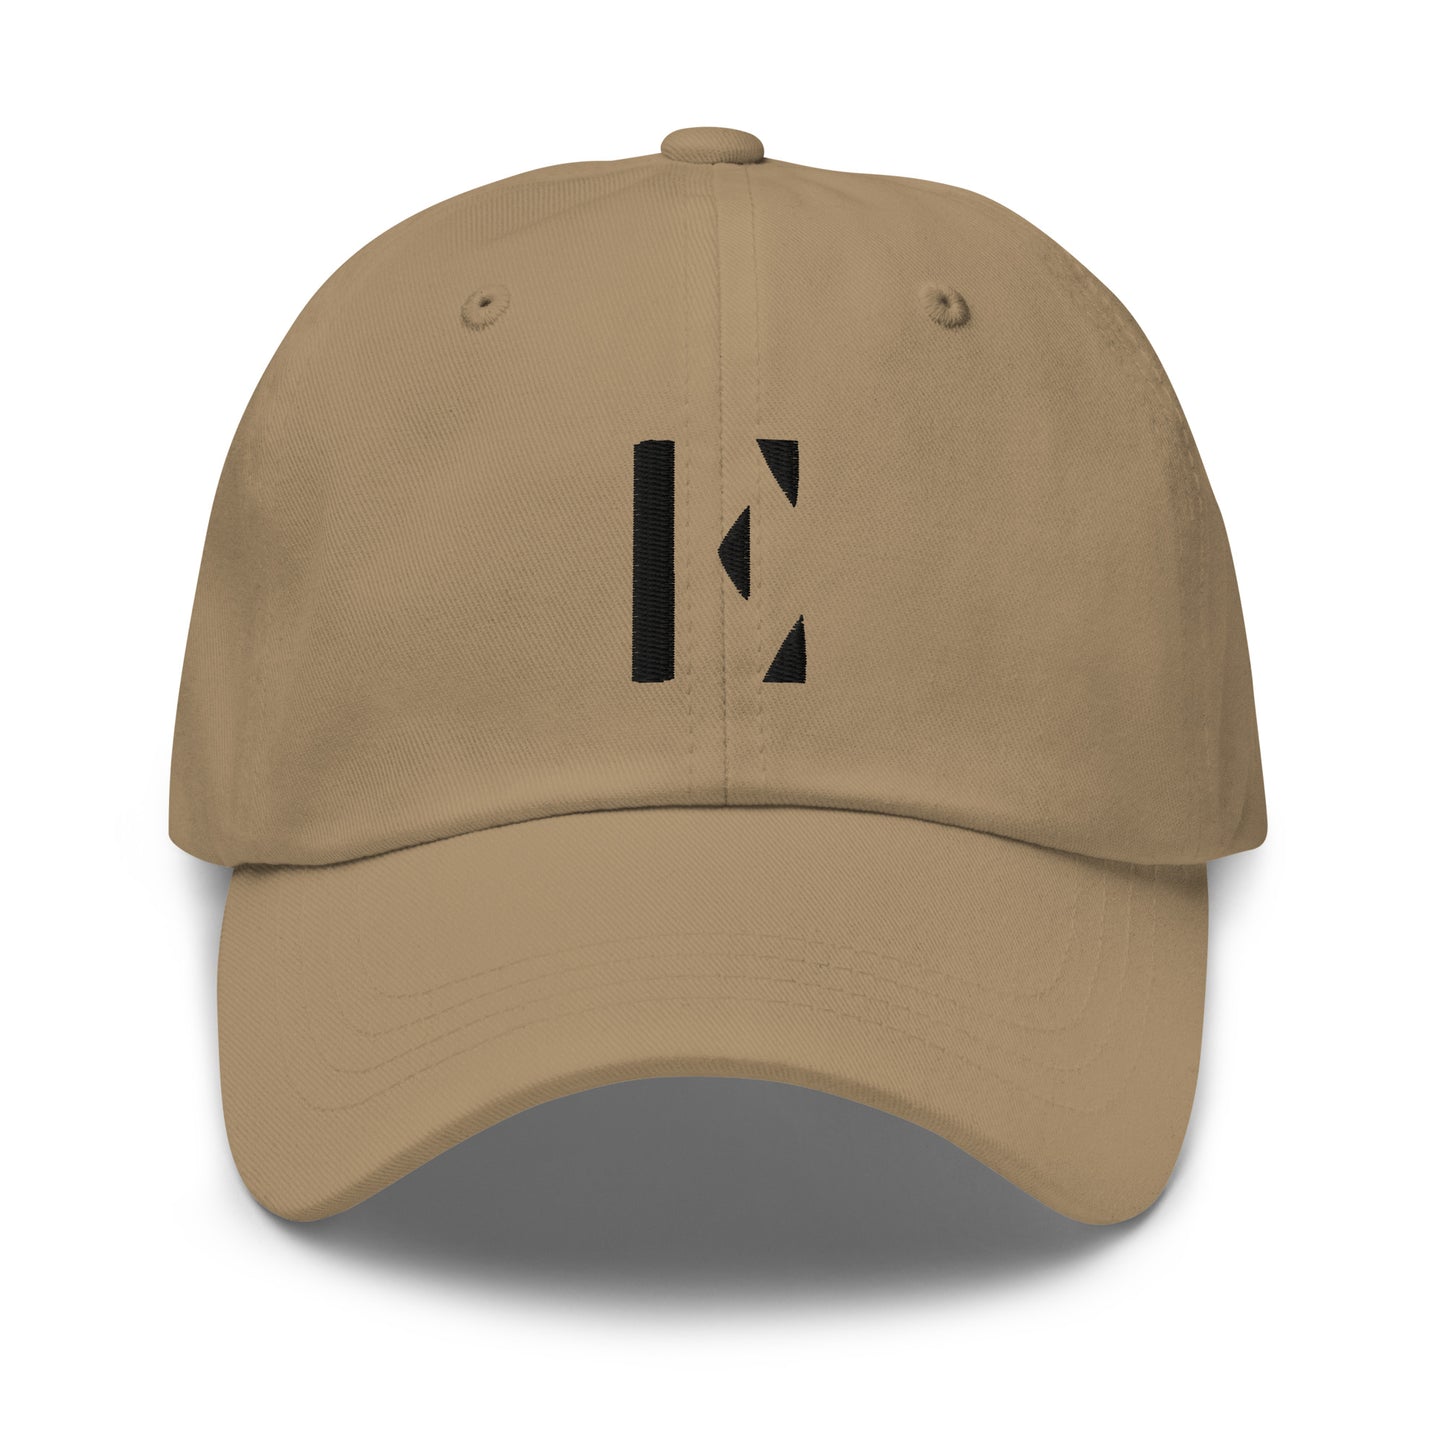 Elementary Threads Black Embroidered Dad hat